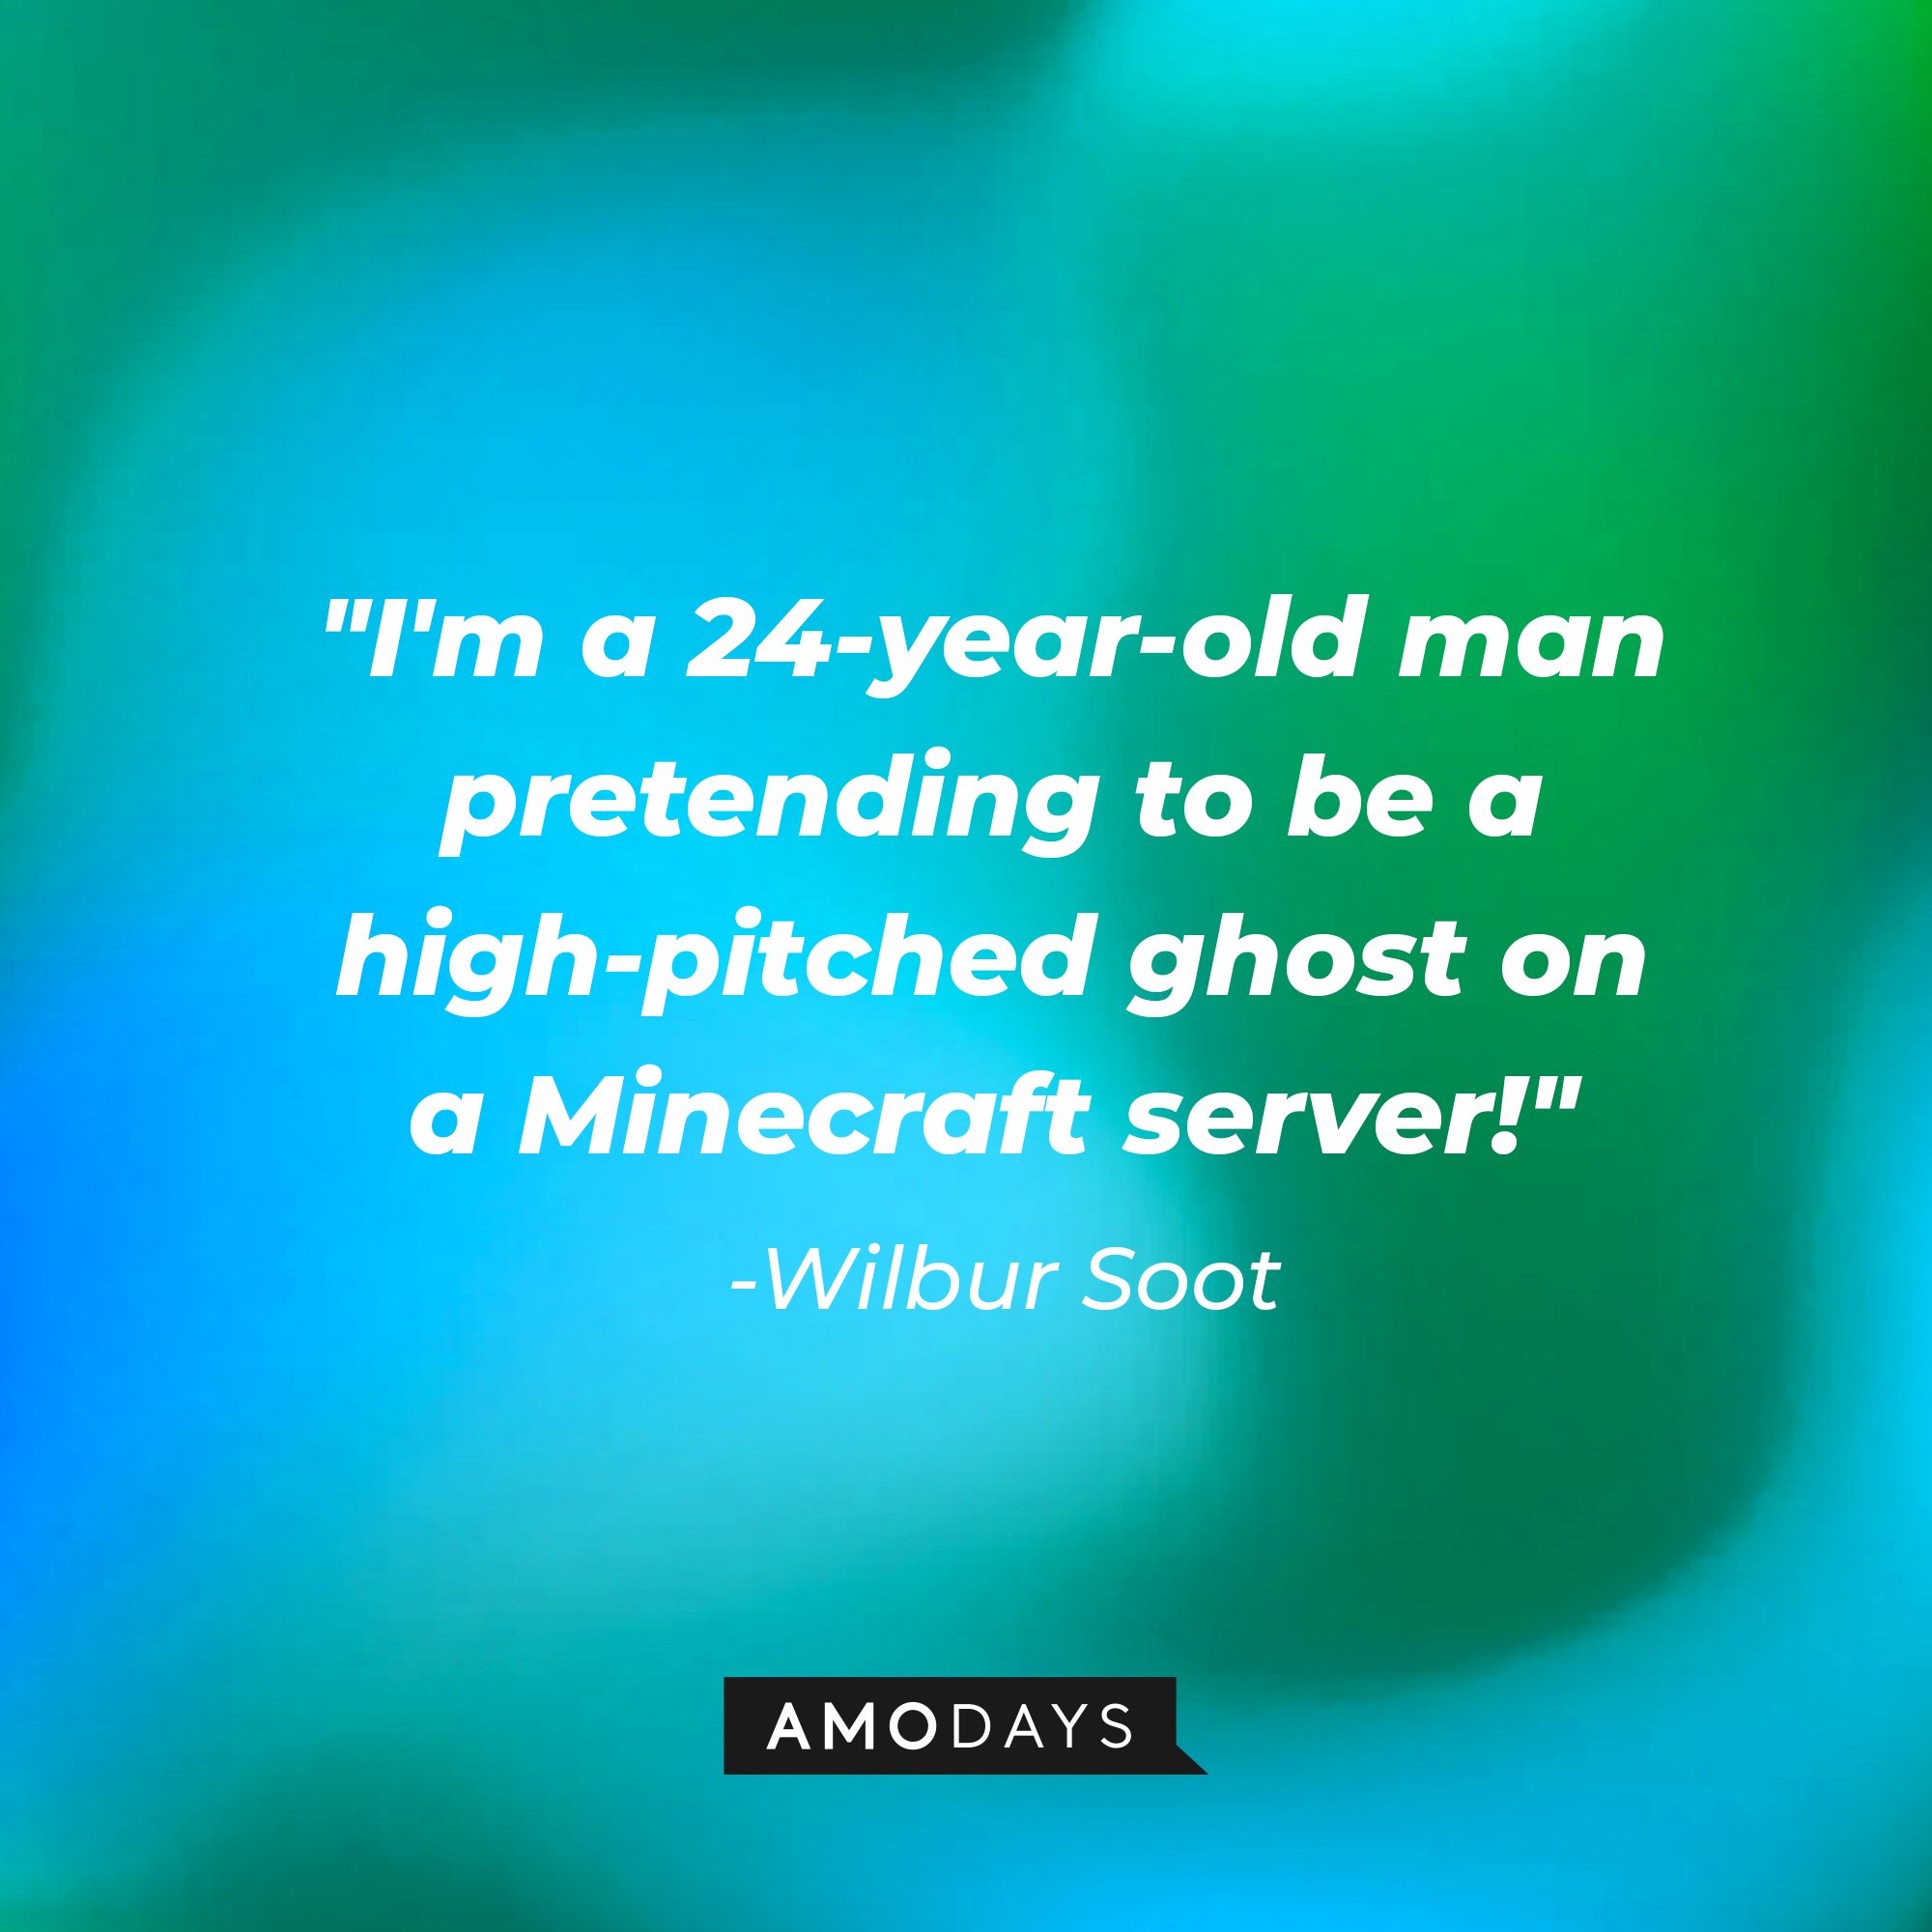 Wilbur Soot's quote: "I'm a 24-year-old man pretending to be a high-pitched ghost on a Minecraft server!" | Image: AmoDays